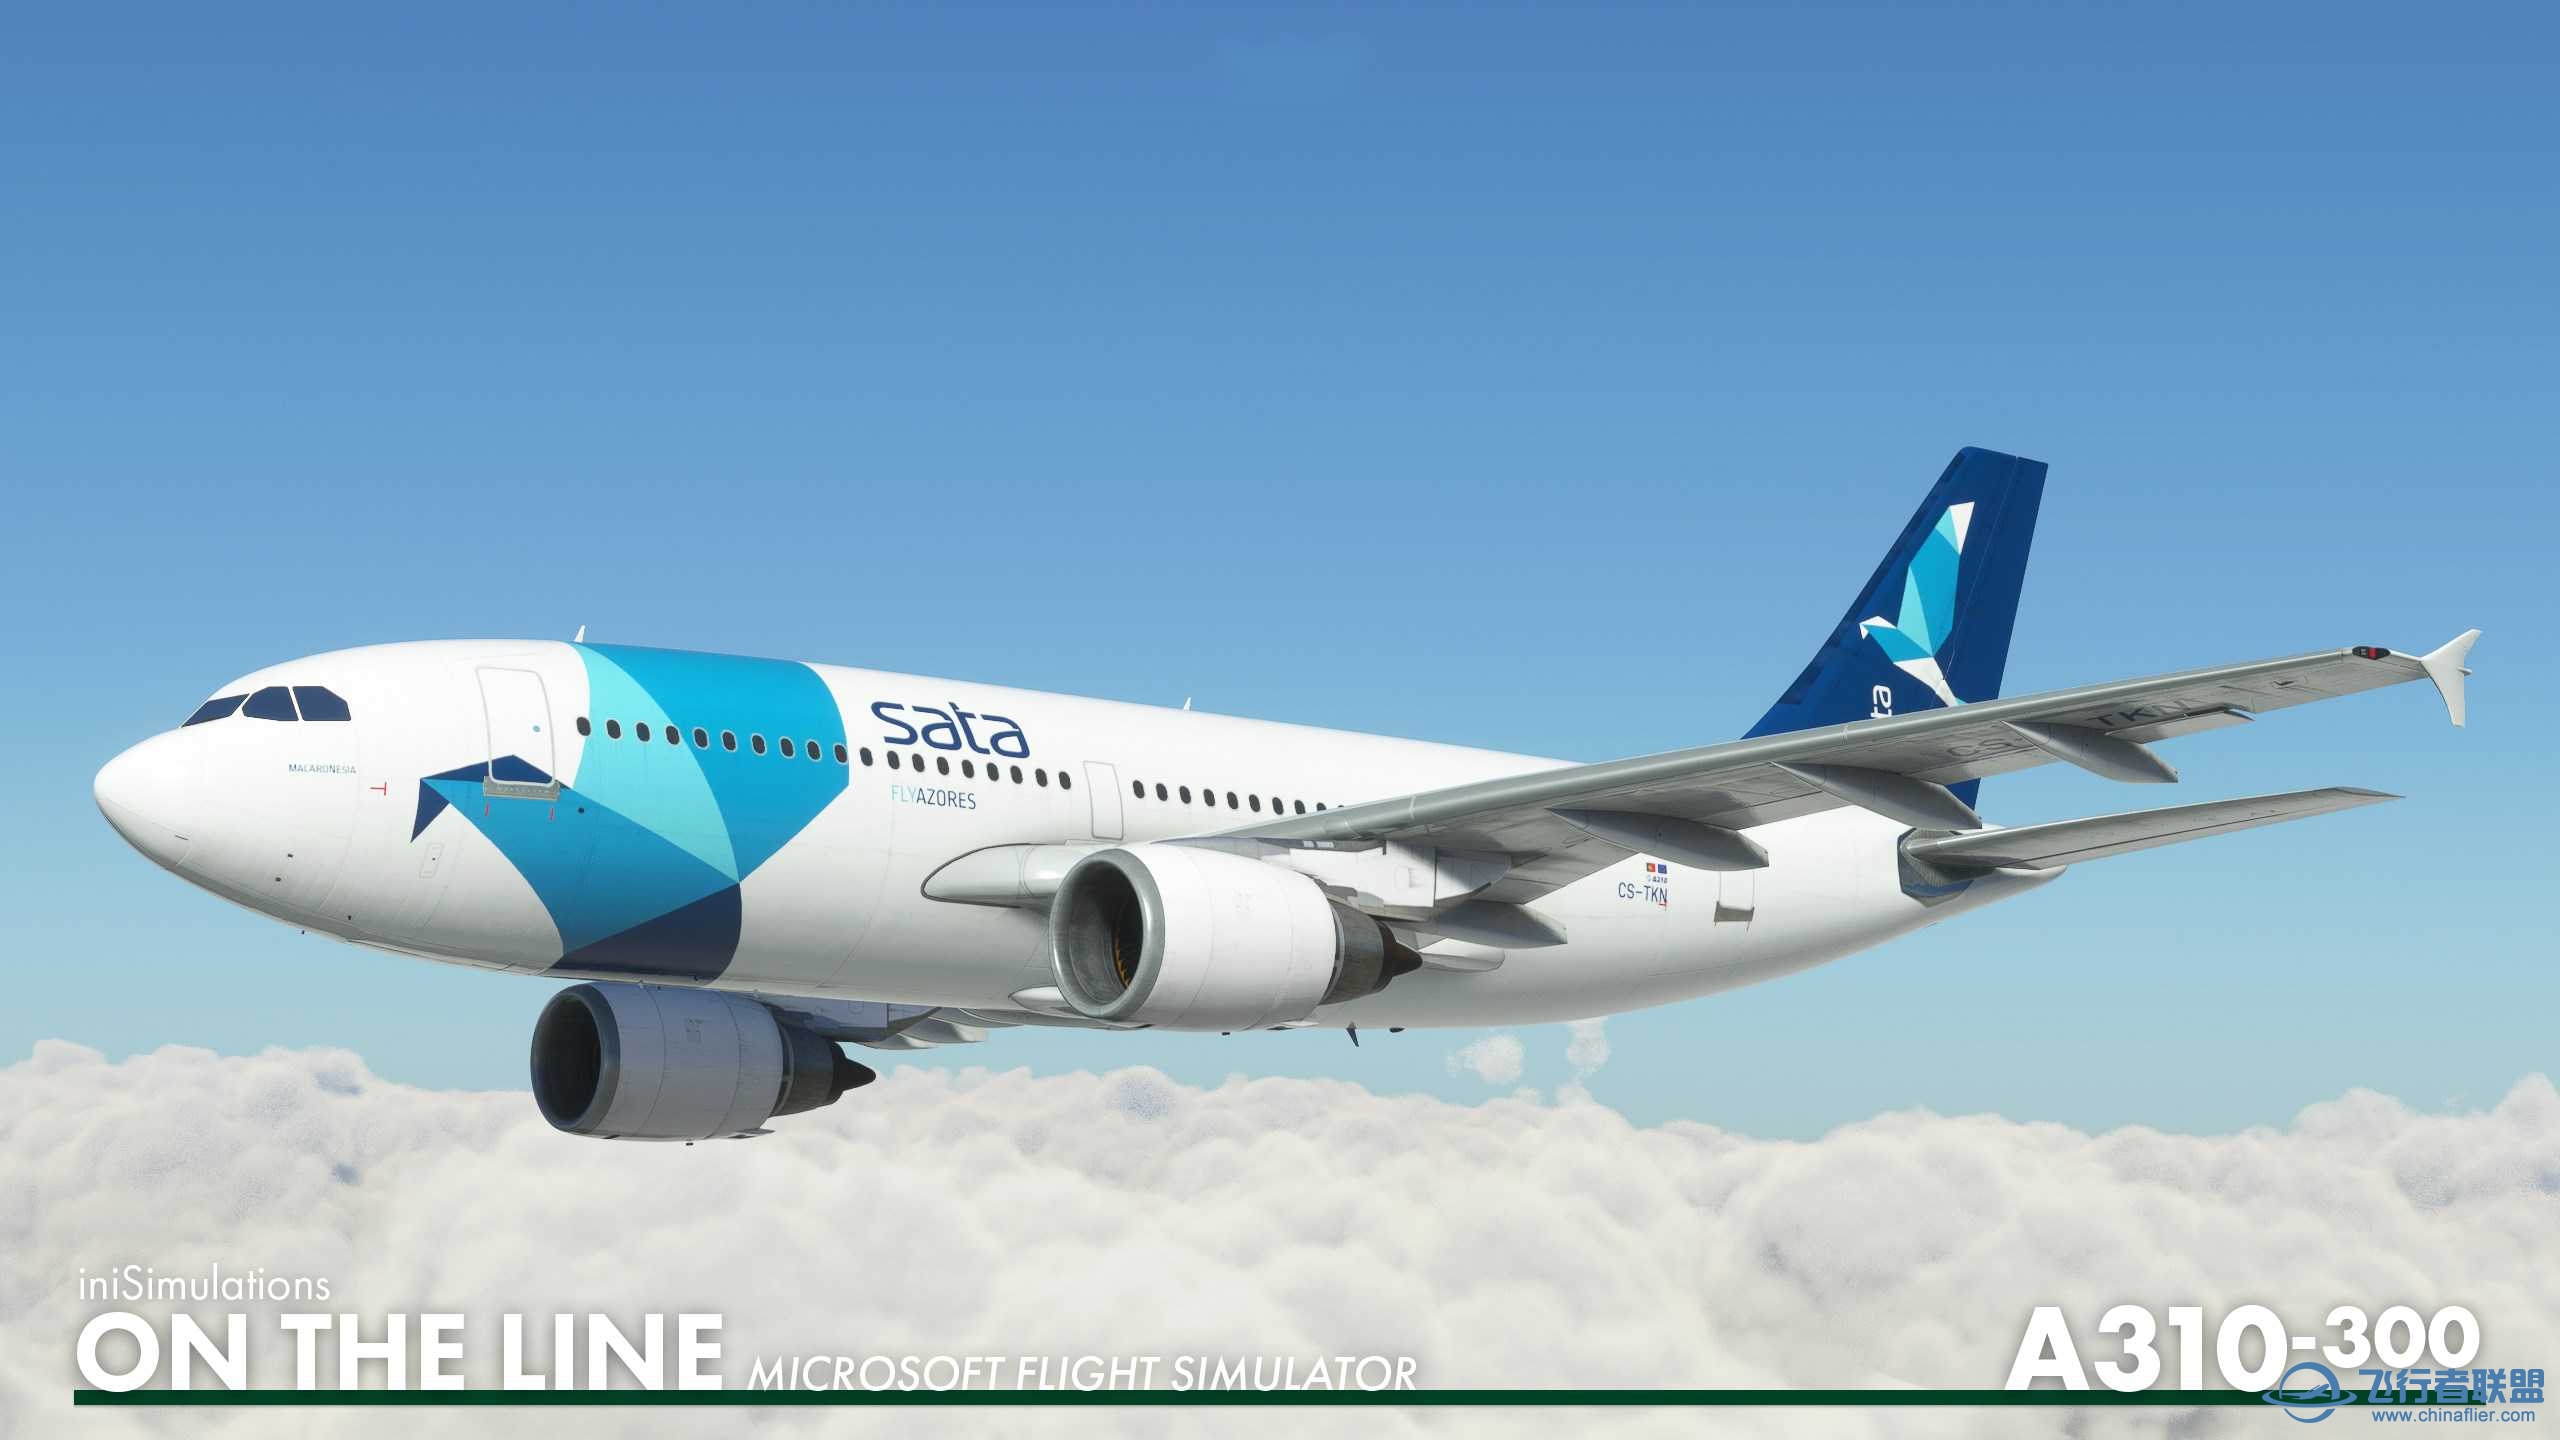 iniSimulations A310-300 will be coming to Microsoft Flight Simulator.-7492 